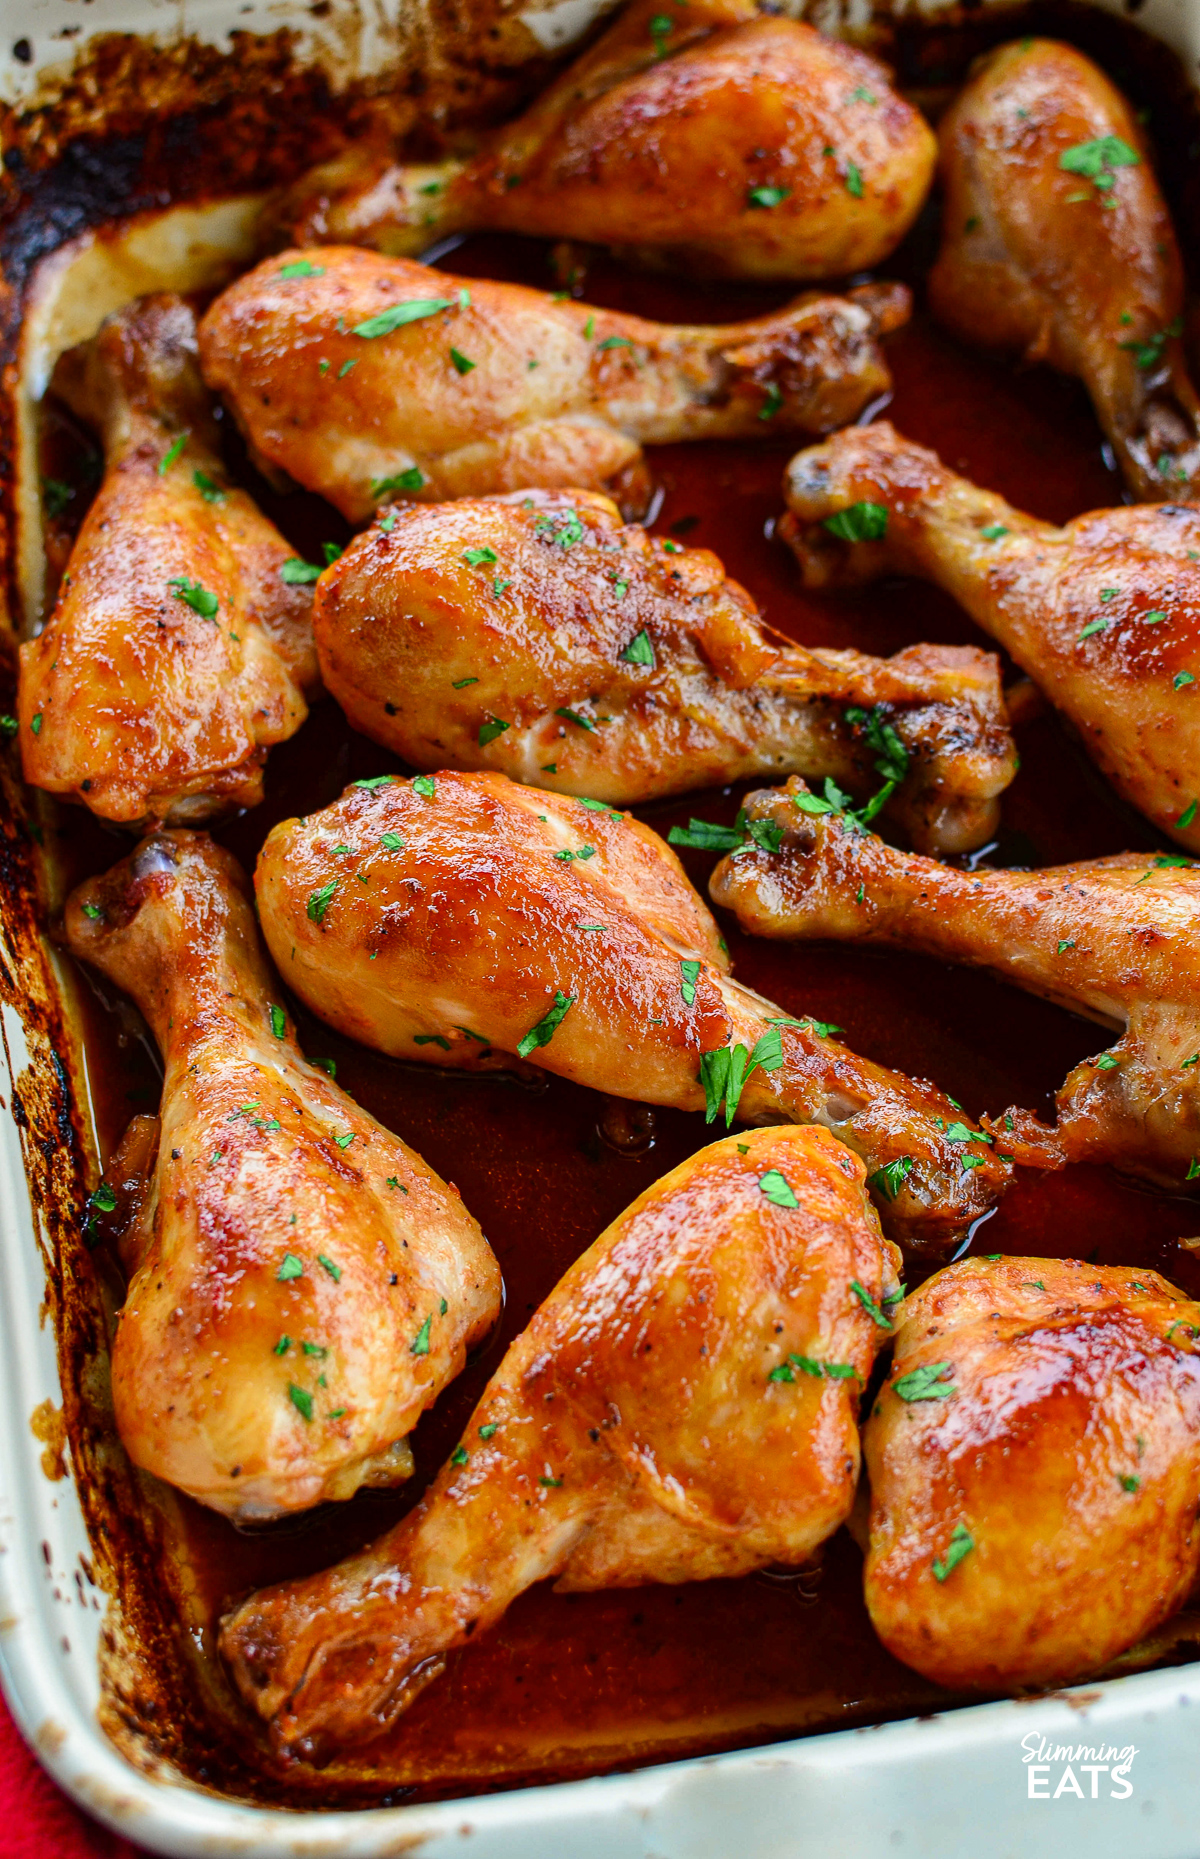 Cooked Maple Glazed Chicken drumsticks in a baking dish